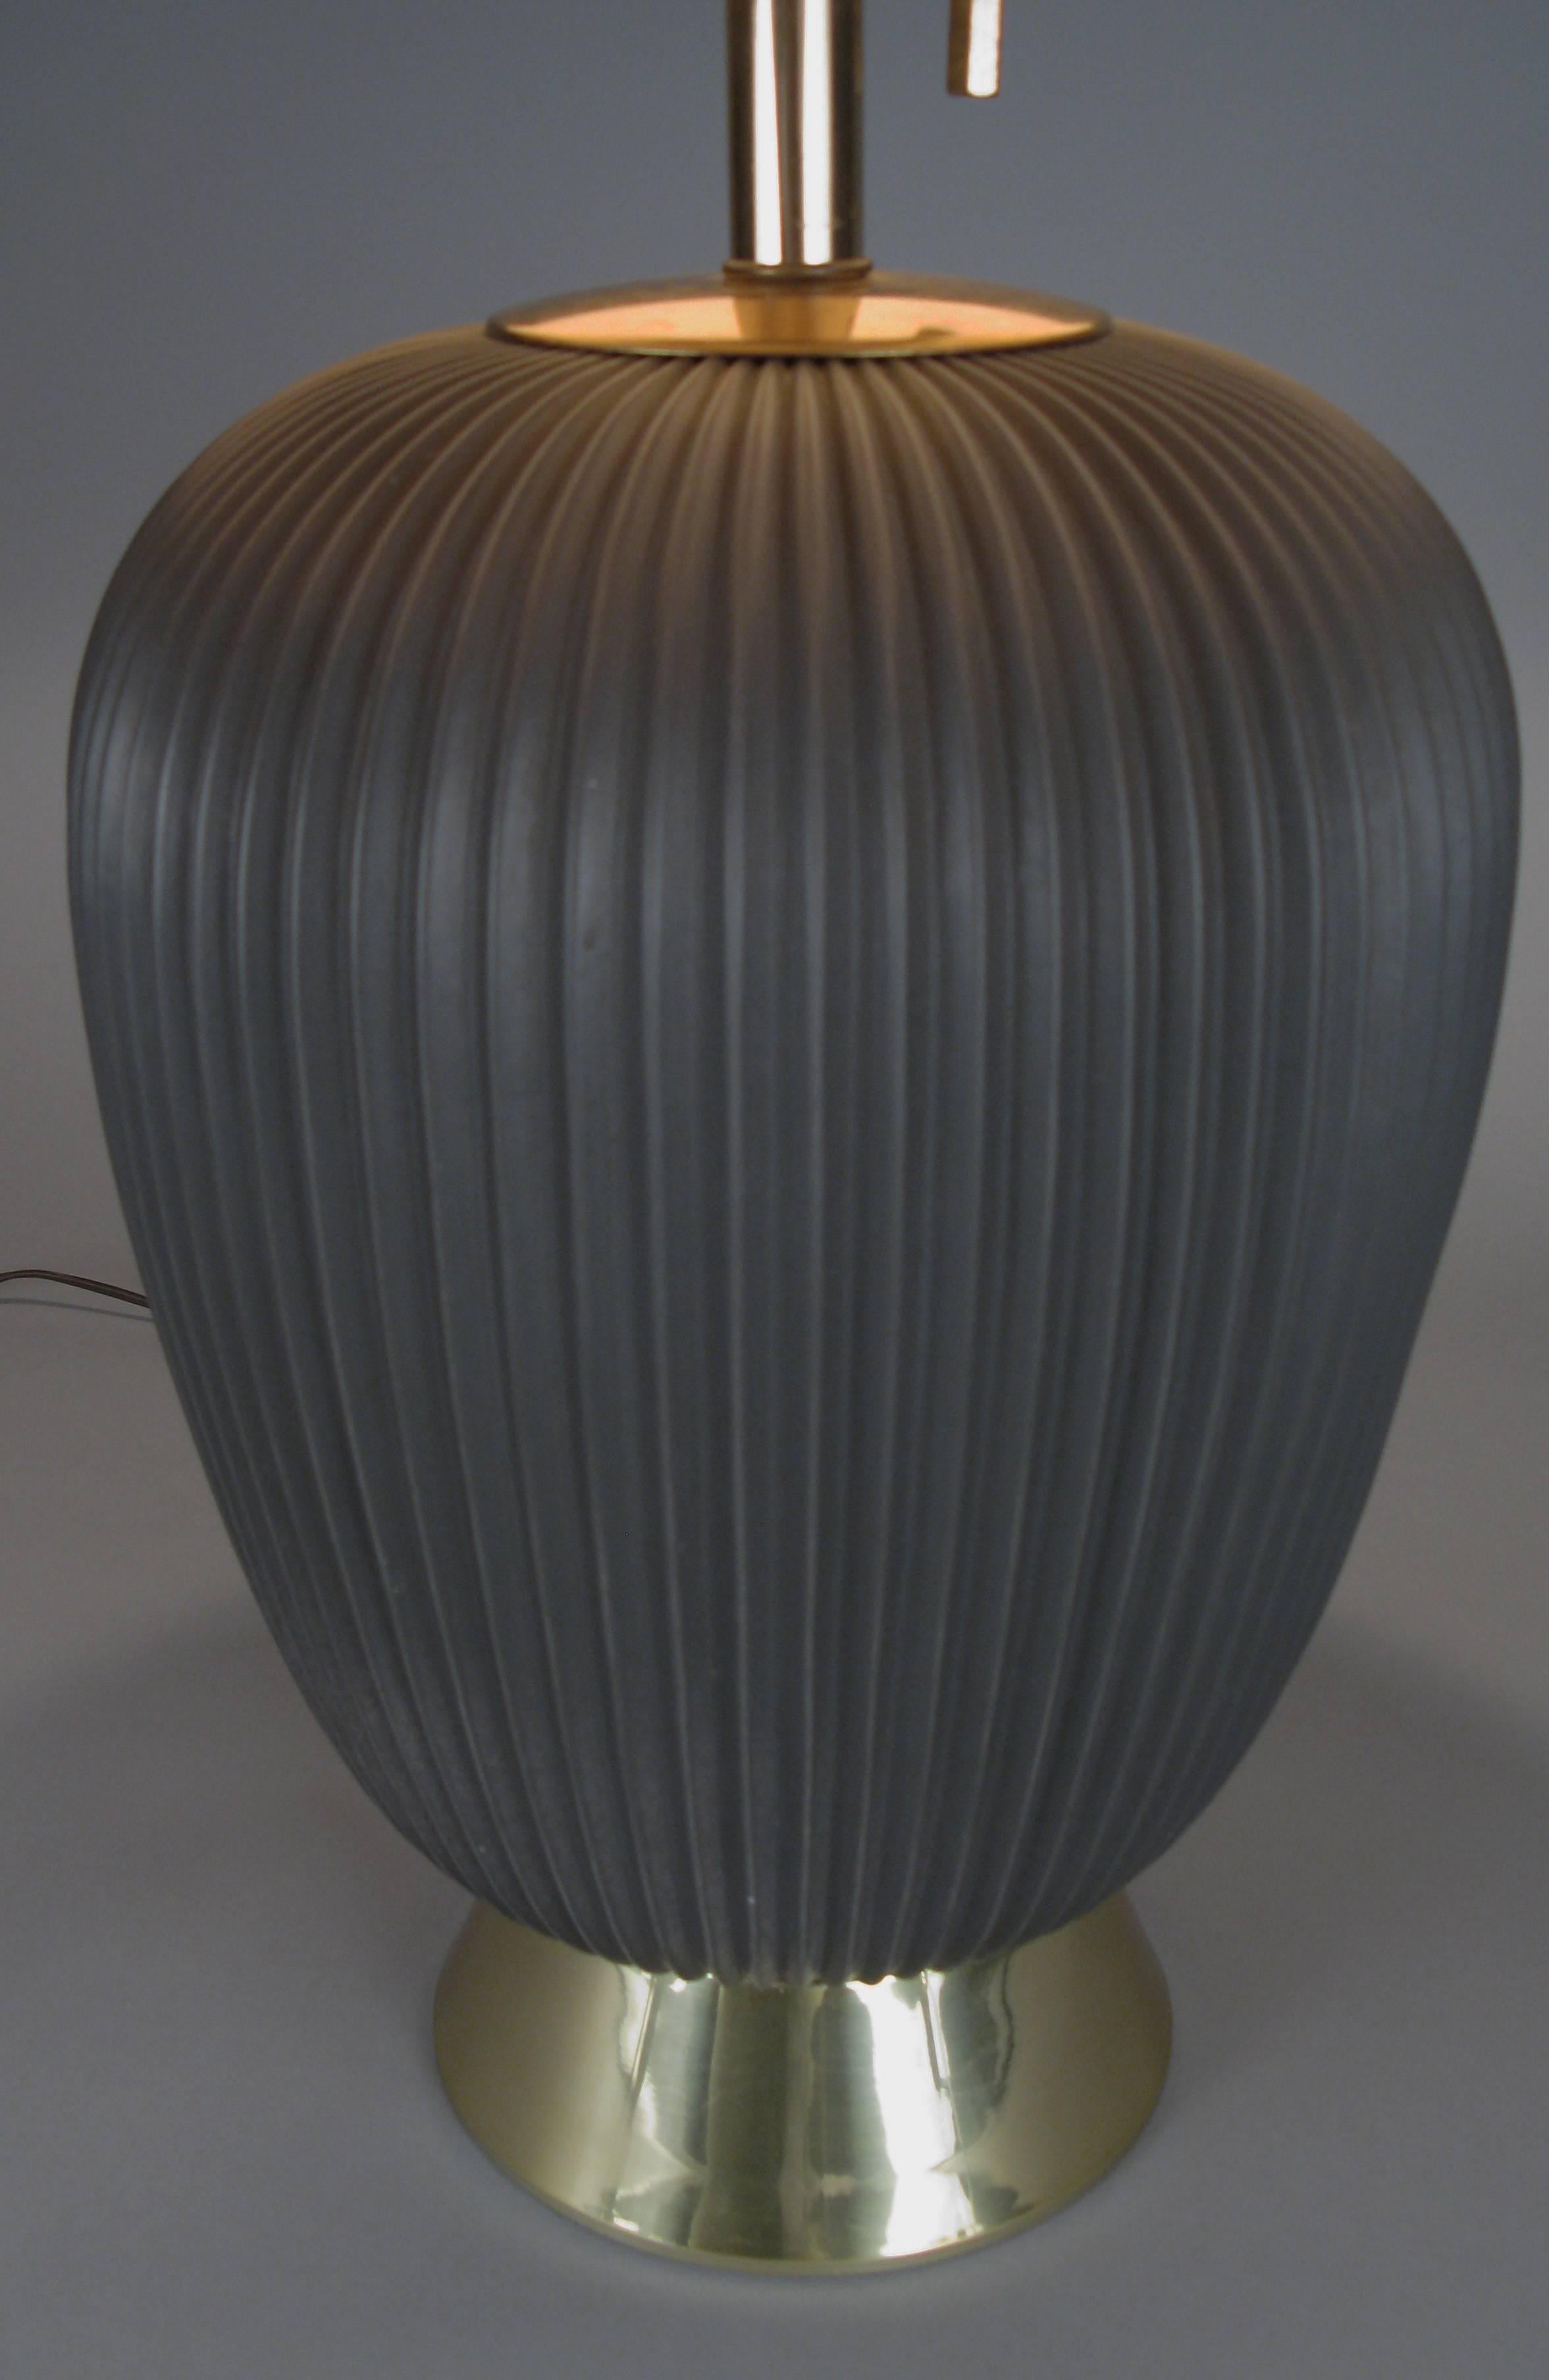 An incredible 1950s example of the rare graphite gray colored 'pleated' ceramic lamp by Gerald Thurston for Lightolier. Beautiful form mounted on a brass base. The amazing original shade mirrors the design of the lamp with a pleated surface. Fitted